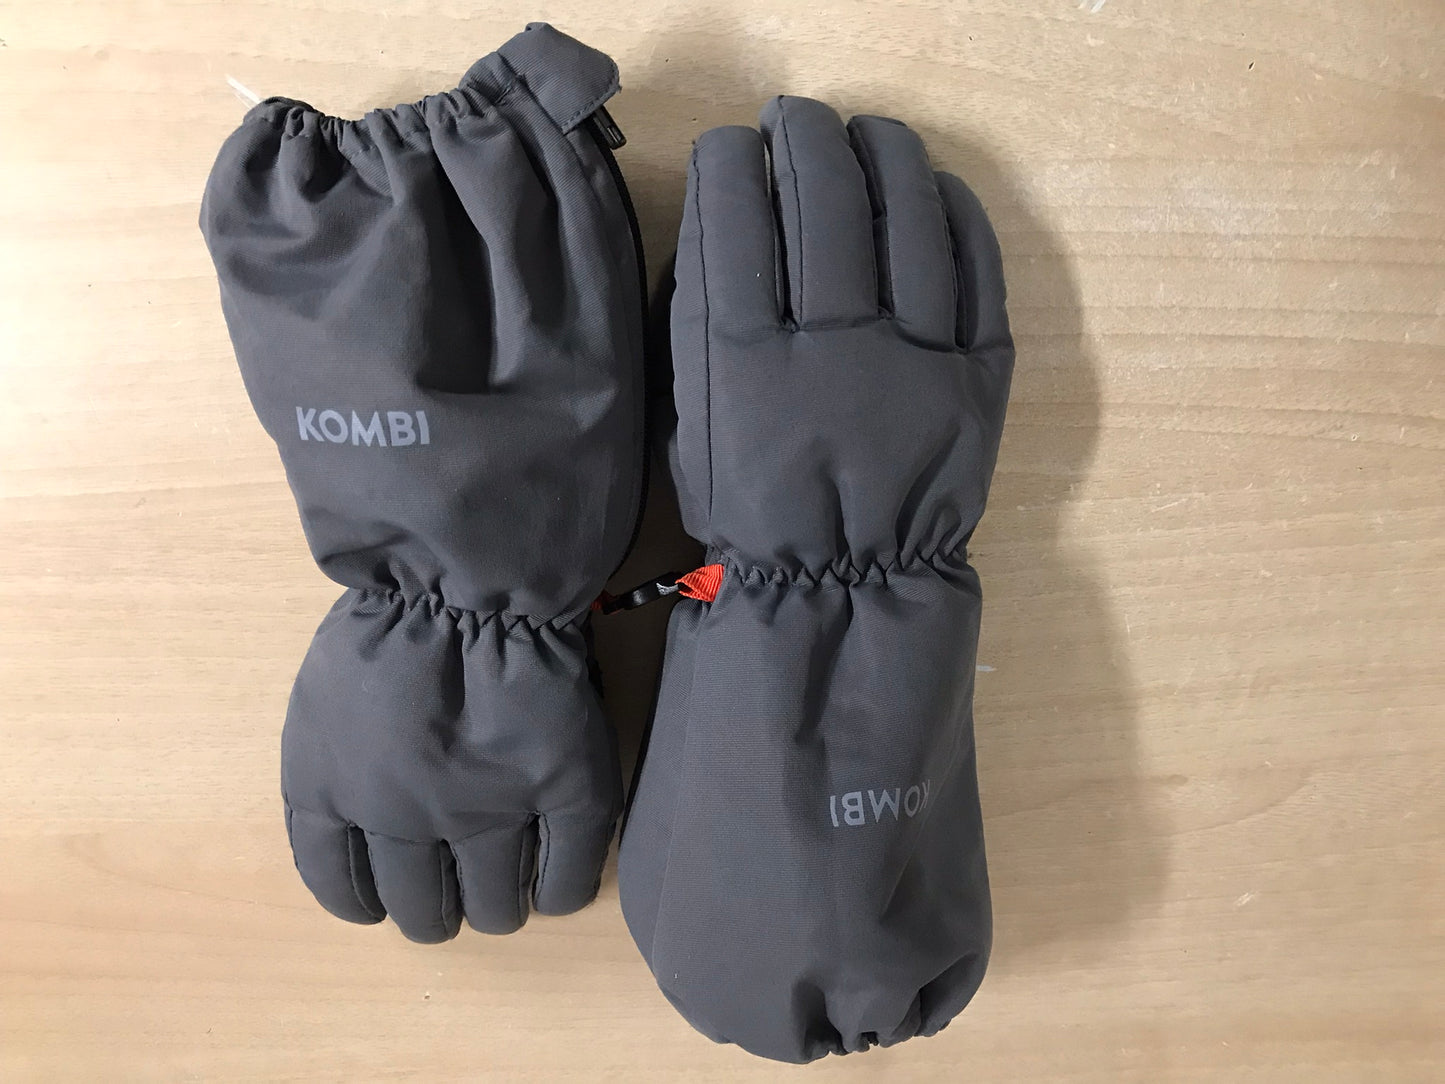 Winter Gloves and Mitts Child Size 7-9 Kombi Grey As New